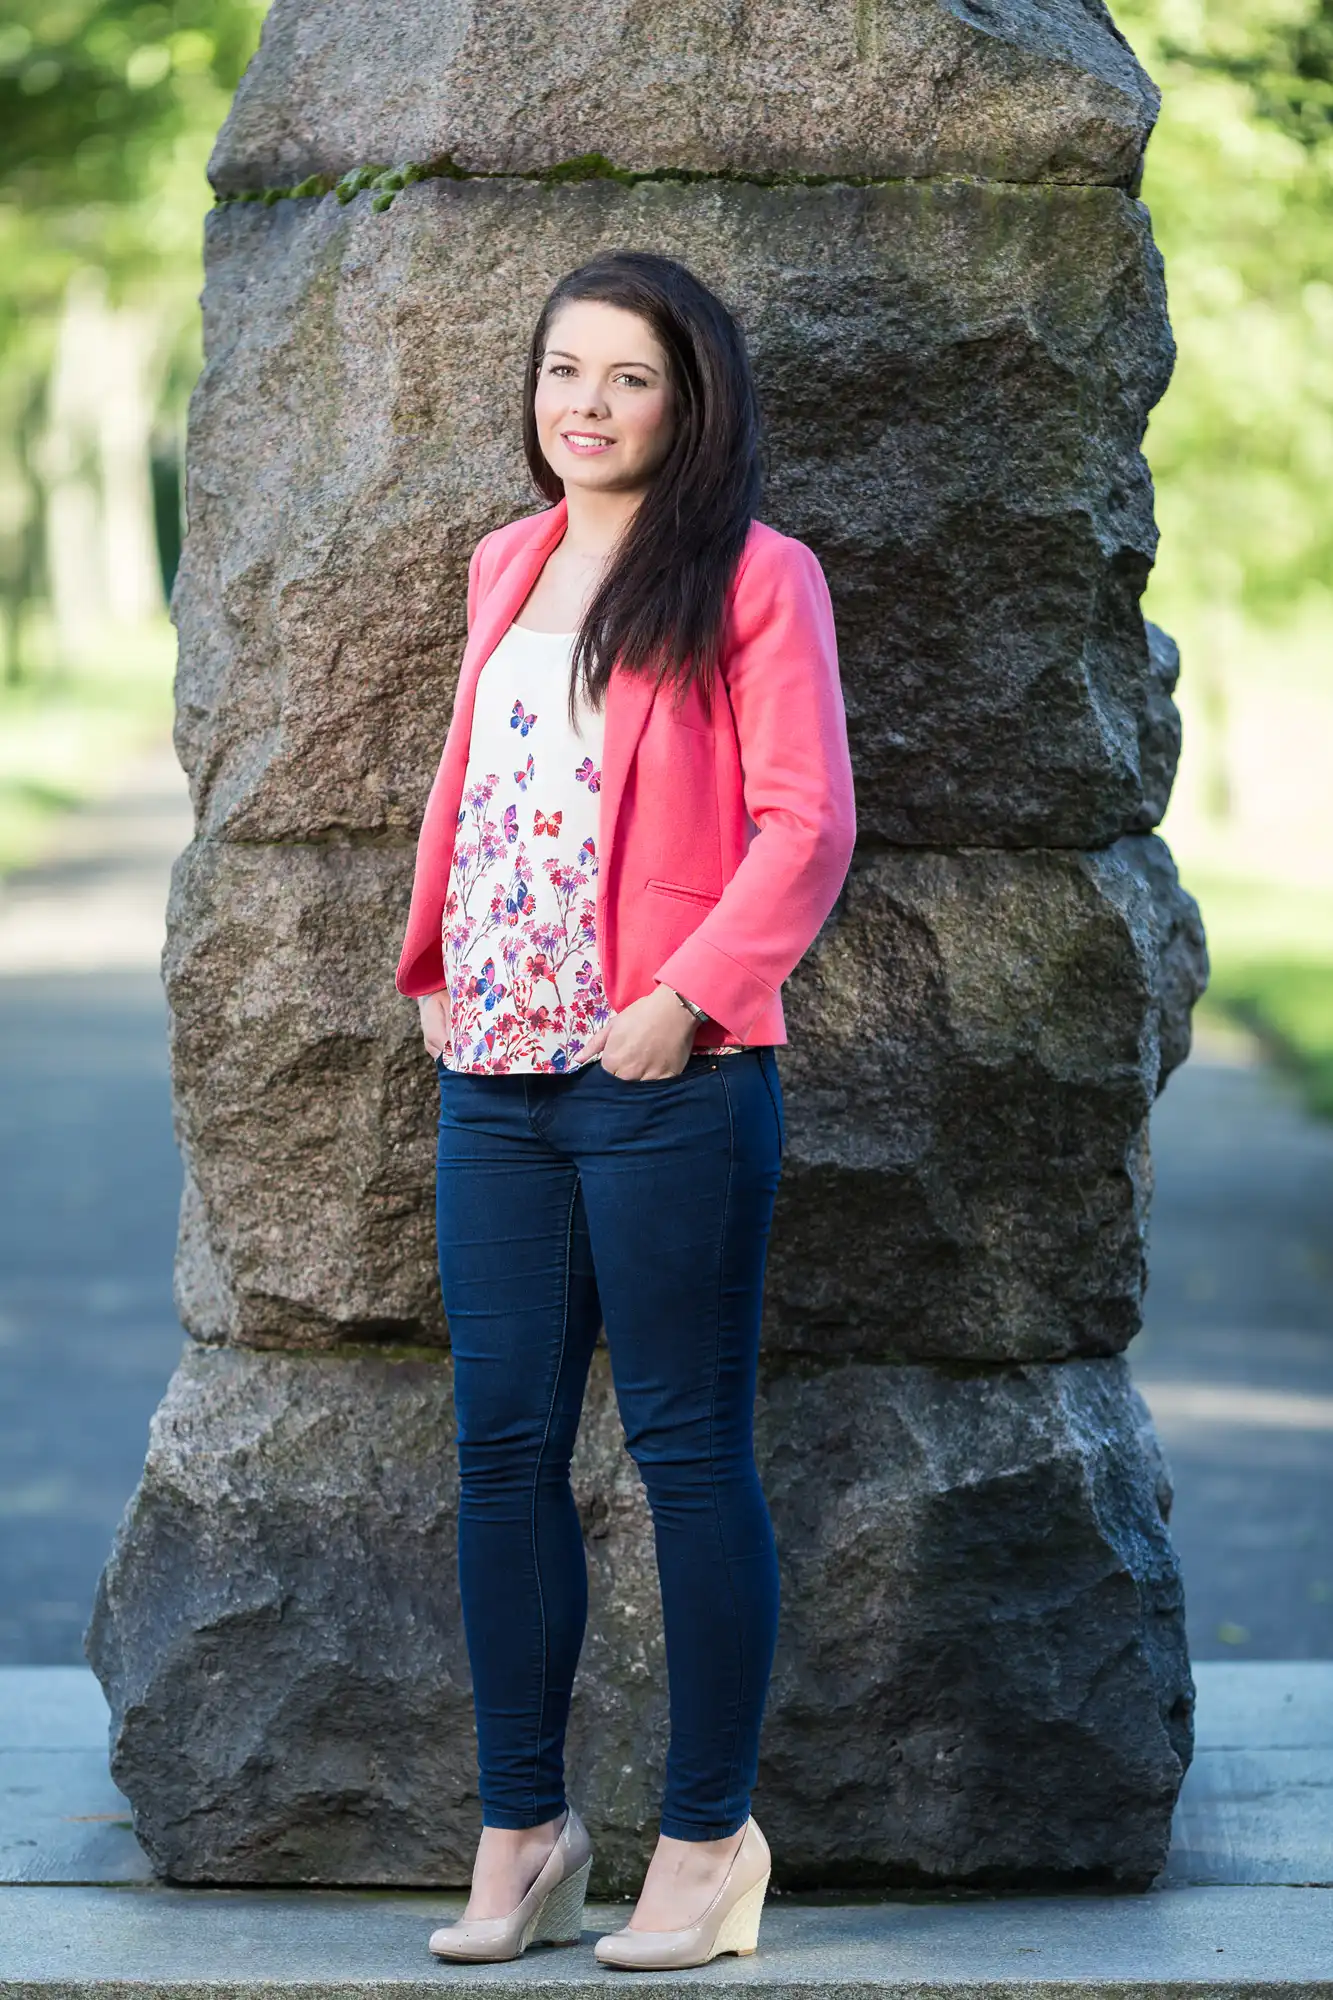 A woman in a pink blazer and blue jeans stands smiling in front of a large stone monument in a park.